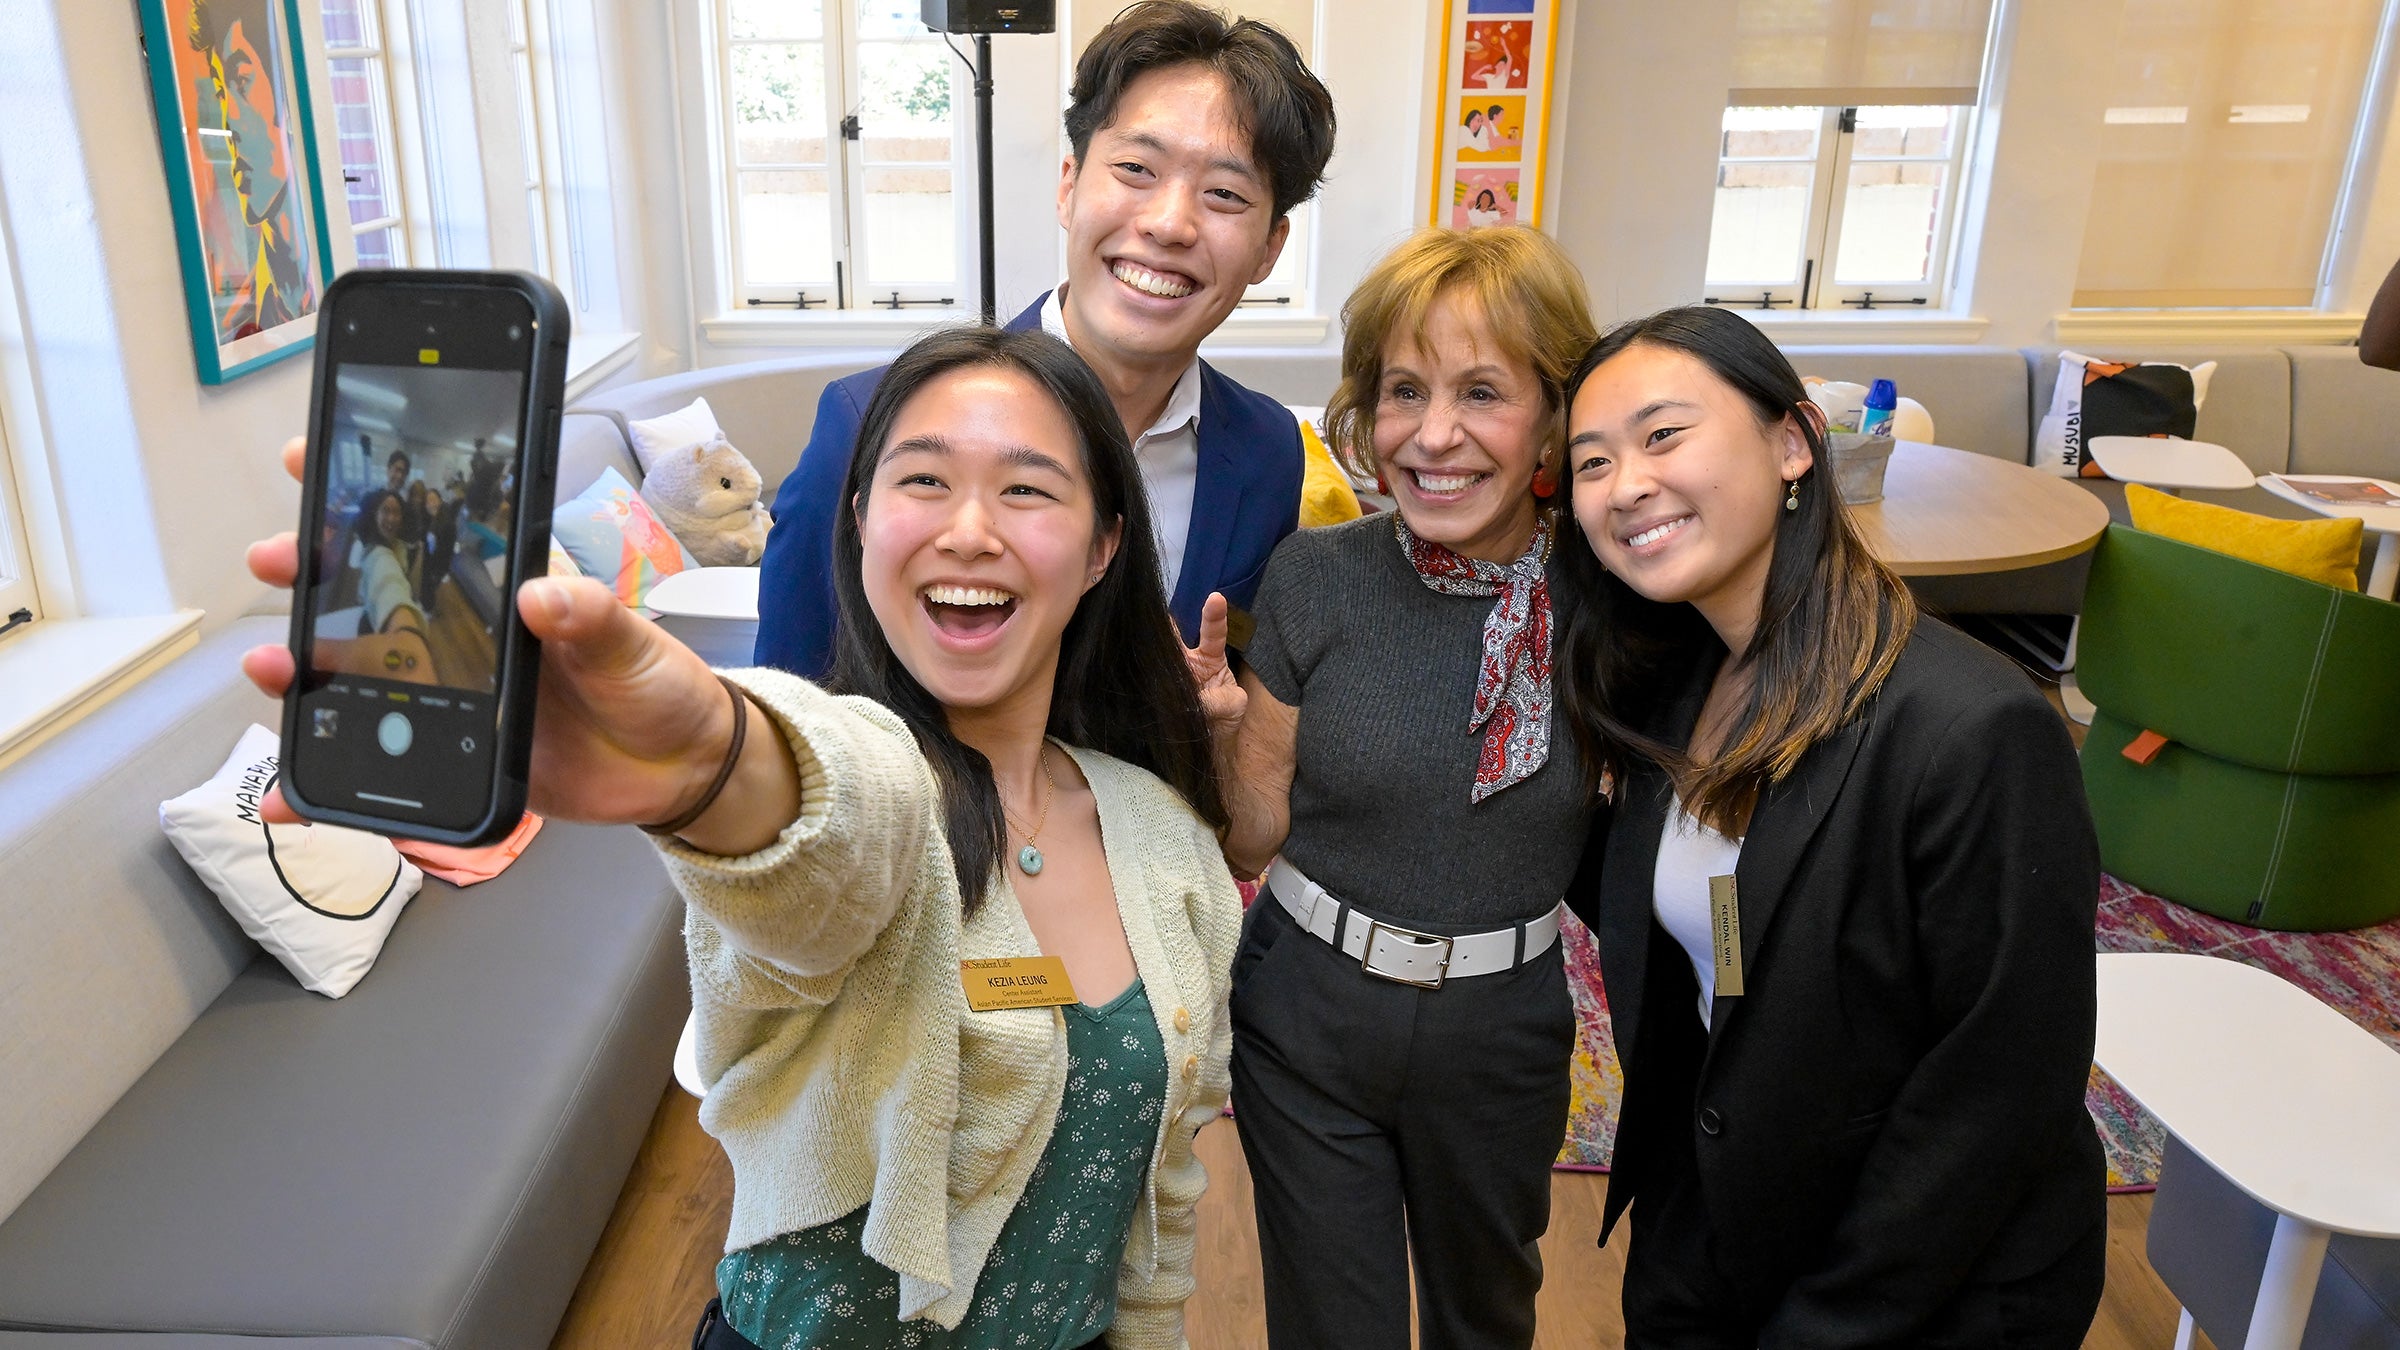 USC Student Equity and Inclusion Programs: Selfies with President Folt